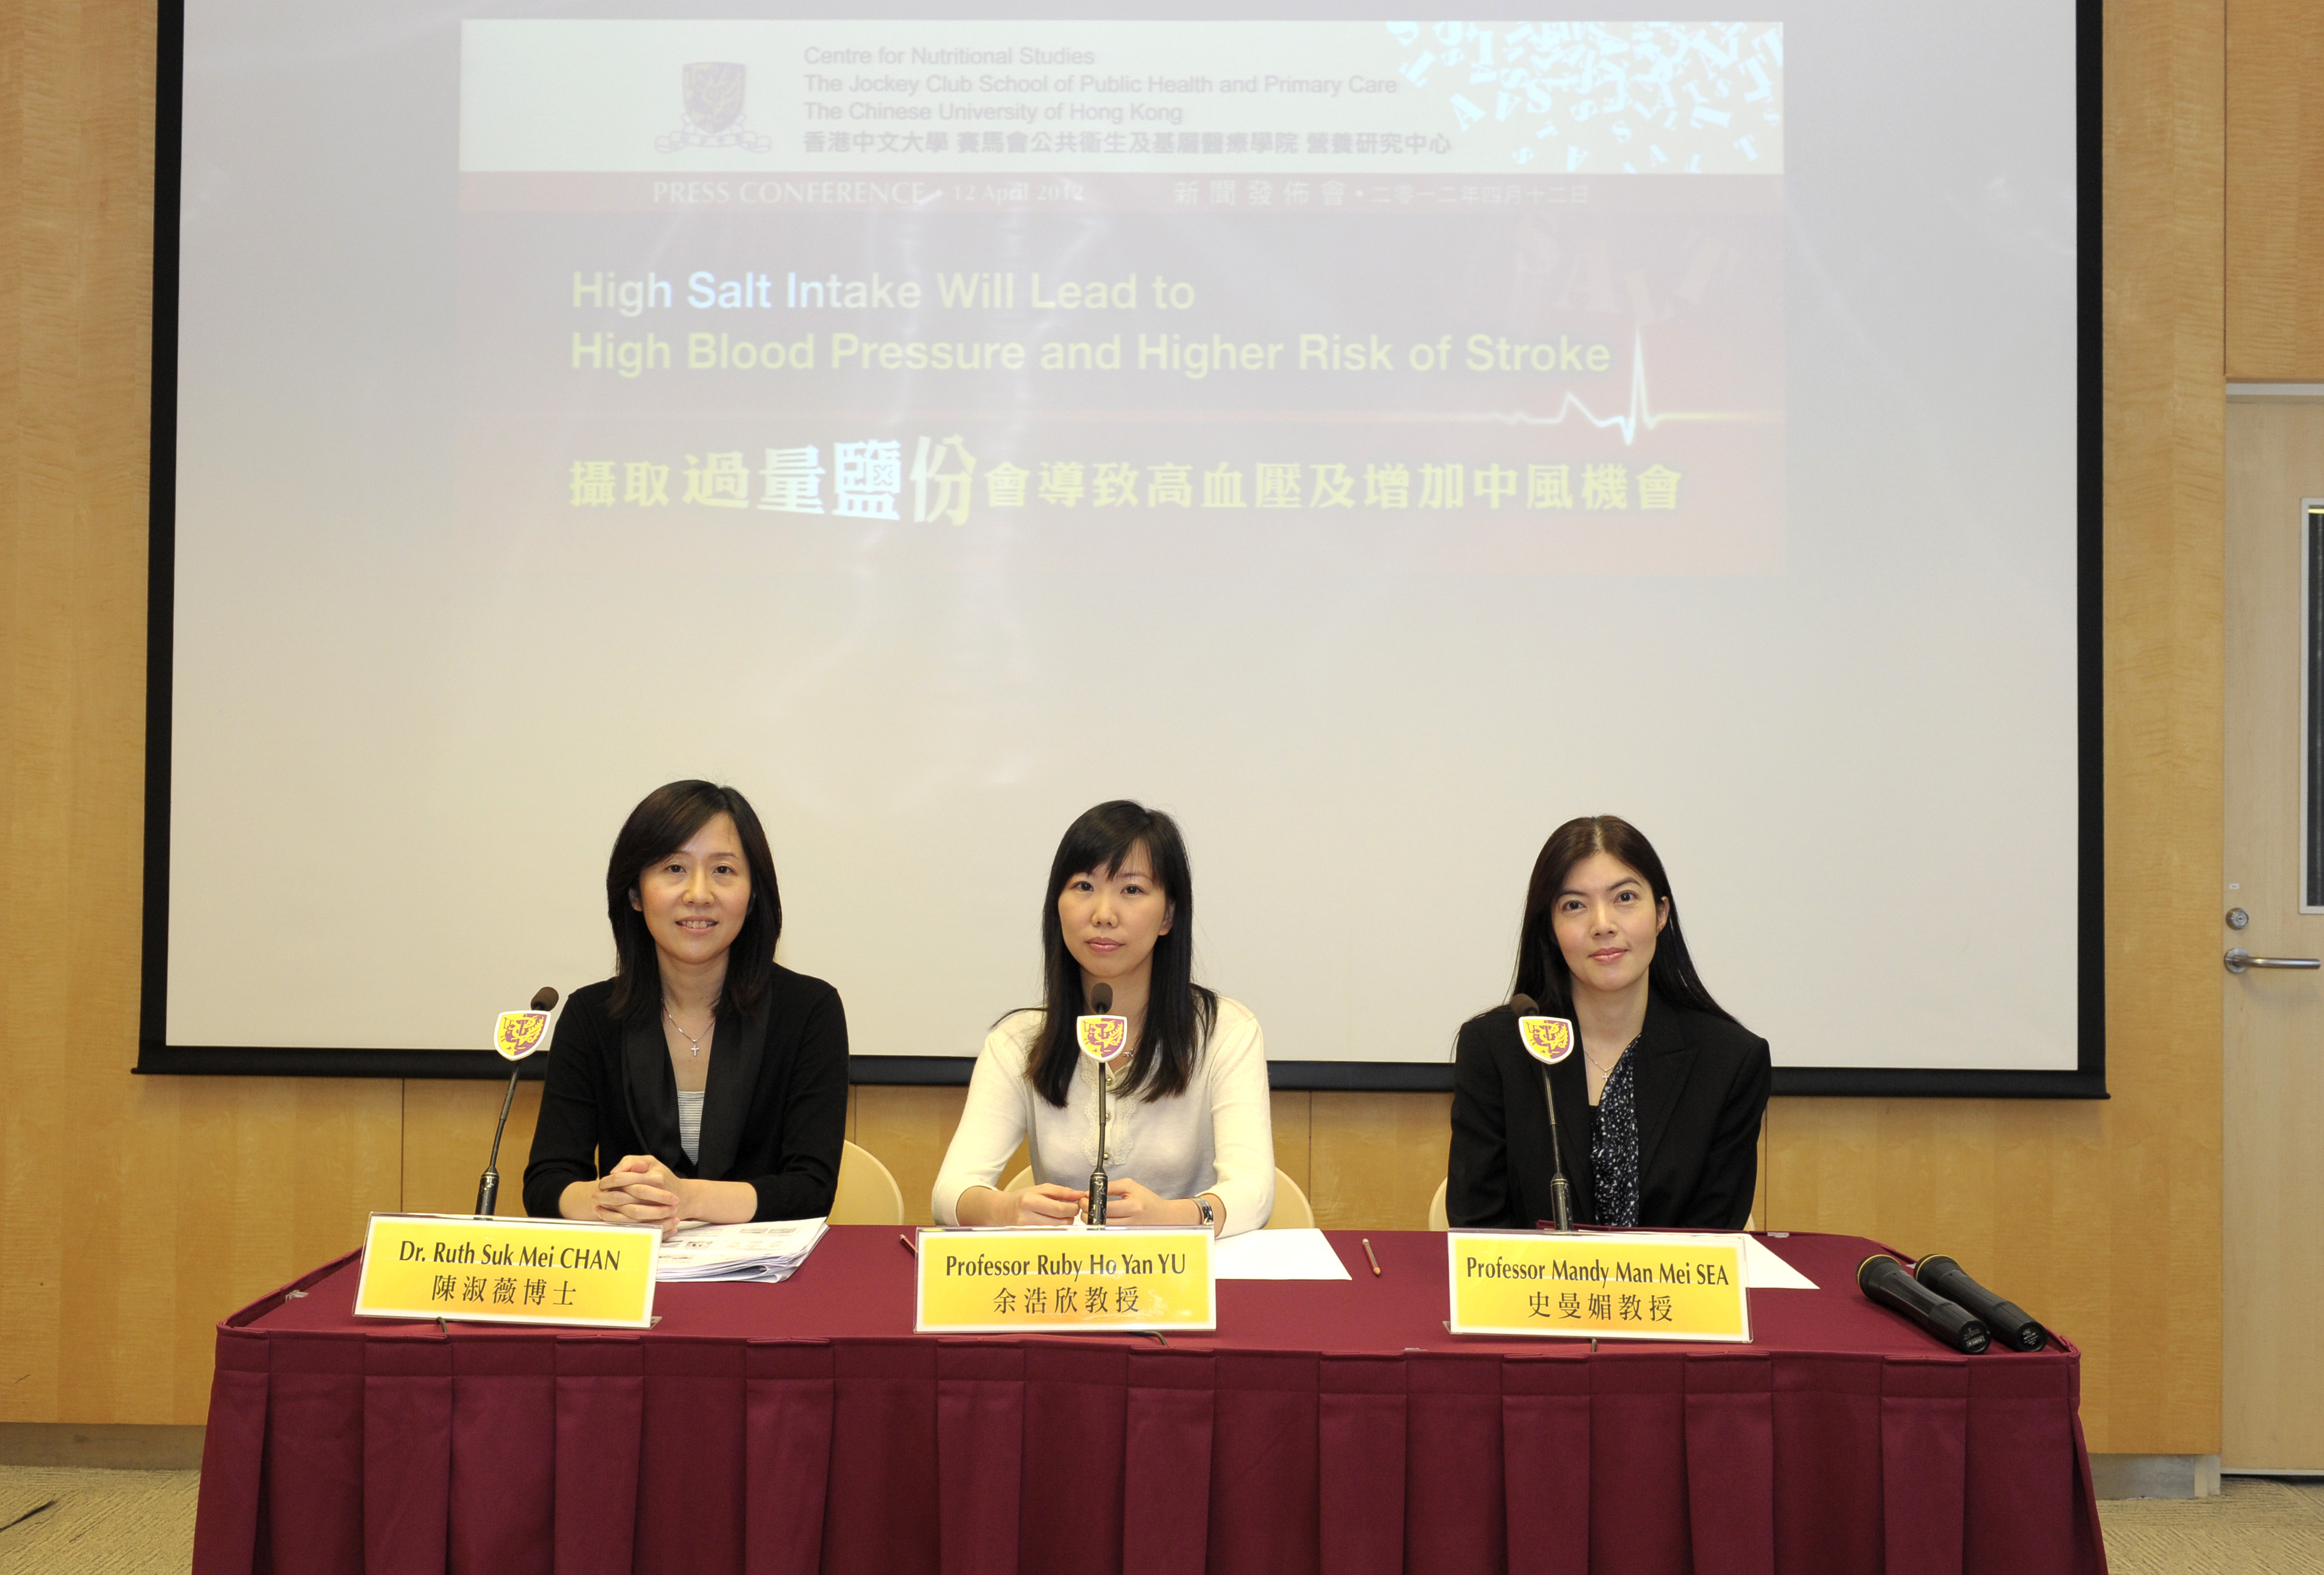 (from left) Dr. CHAN Suk Mei Ruth, Research Associate; Professor YU Ho Yan Ruby, Research Assistant Professor; and Prof. SEA Man Mei Mandy, Assistant Professor (by Courtesy), Department of Medicine and Therapeutics, and Centre Manager, Centre for Nutritional Studies, CUHK present the findings of their study that high salt level will lead to high blood pressure and higher risk of stroke, and recommend that reducing salt intake is the simplest and the most cost-effective way to prevent stroke